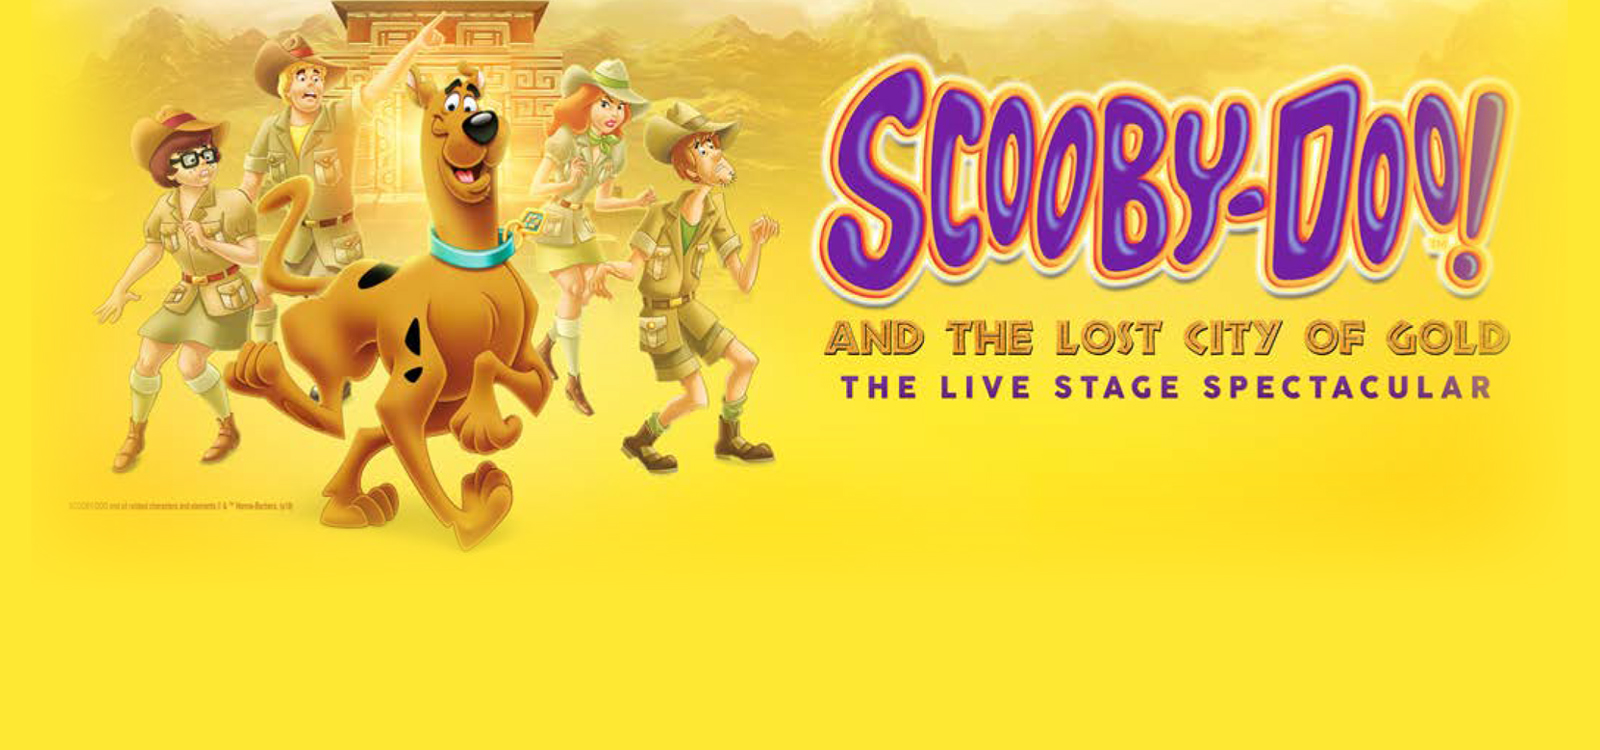 SCOOBY-DOO! AND THE LOST CITY OF GOLD